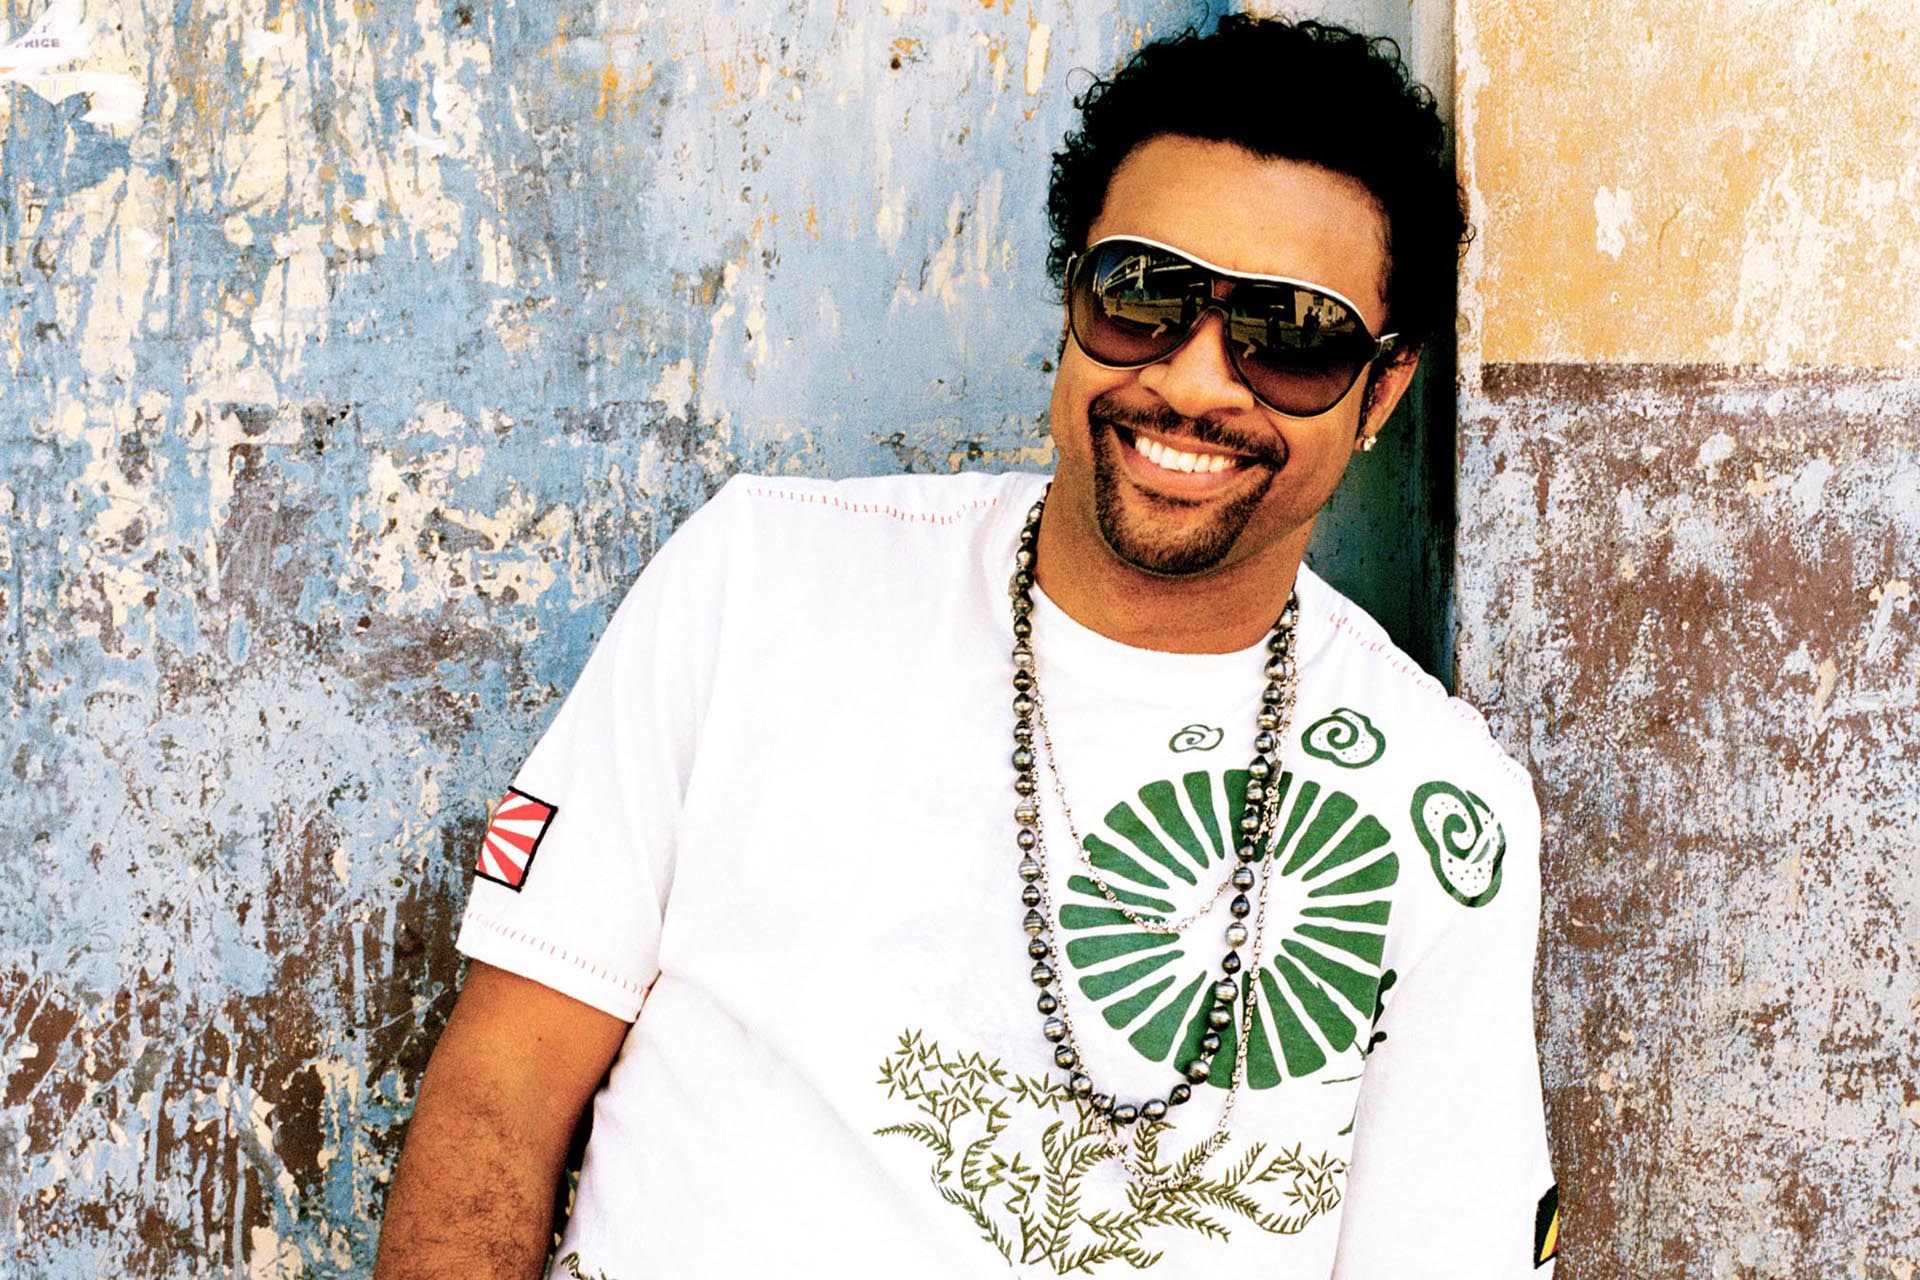 Shaggy to receive honorary doctorate from Brown University